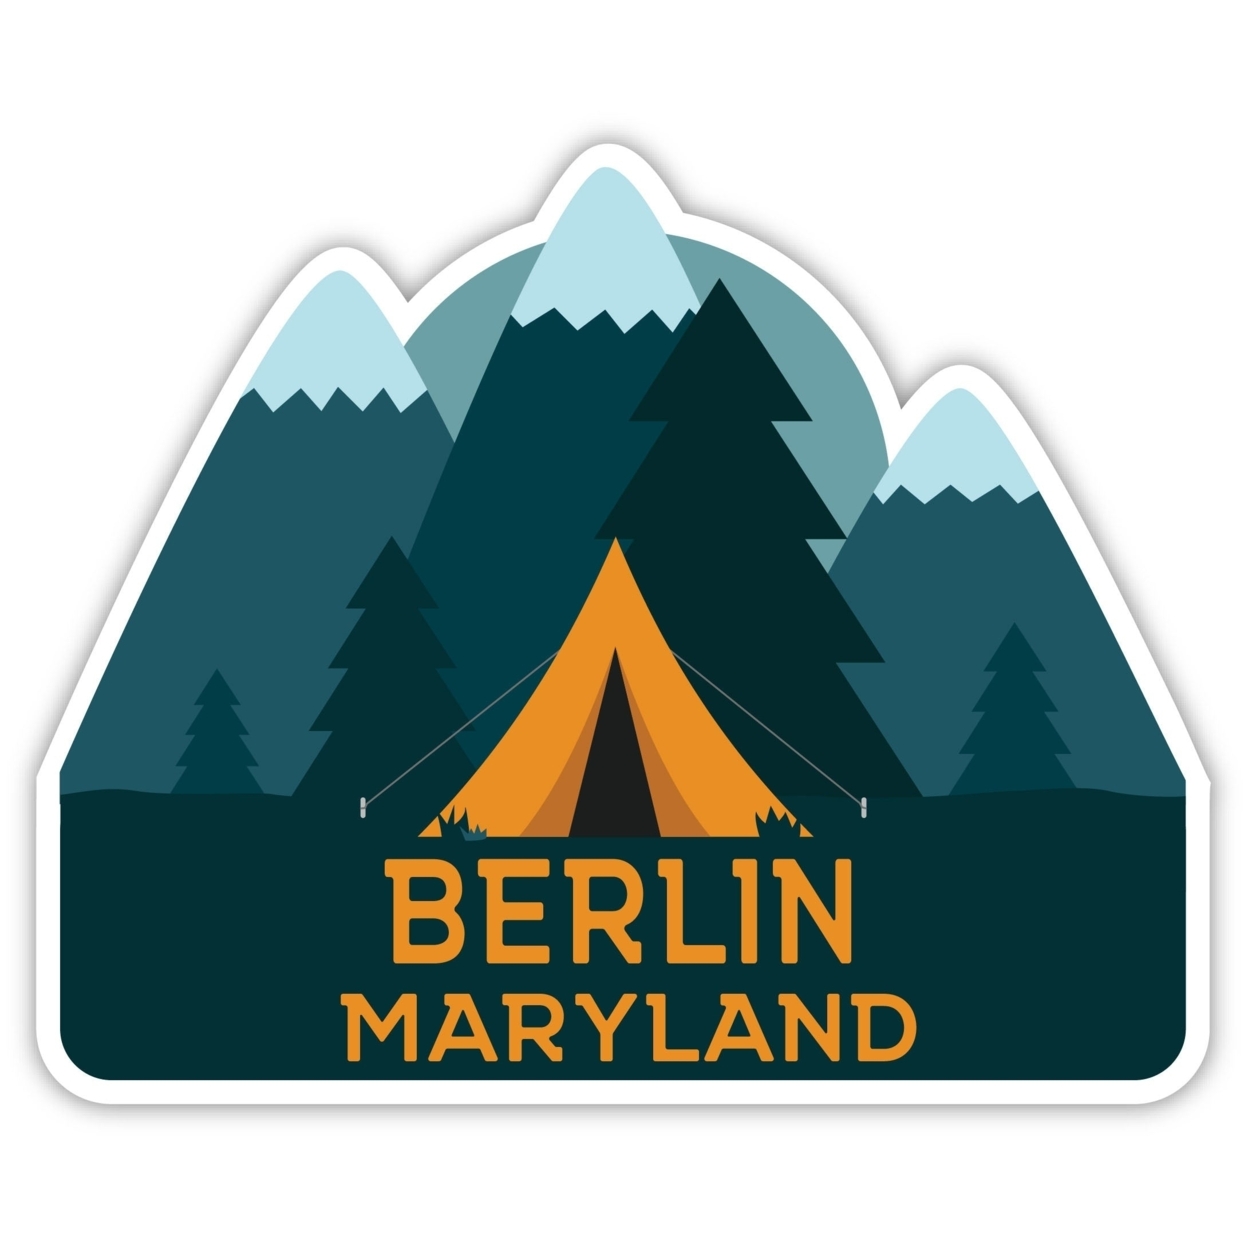 Berlin Maryland Souvenir Decorative Stickers (Choose Theme And Size) - Single Unit, 10-Inch, Tent